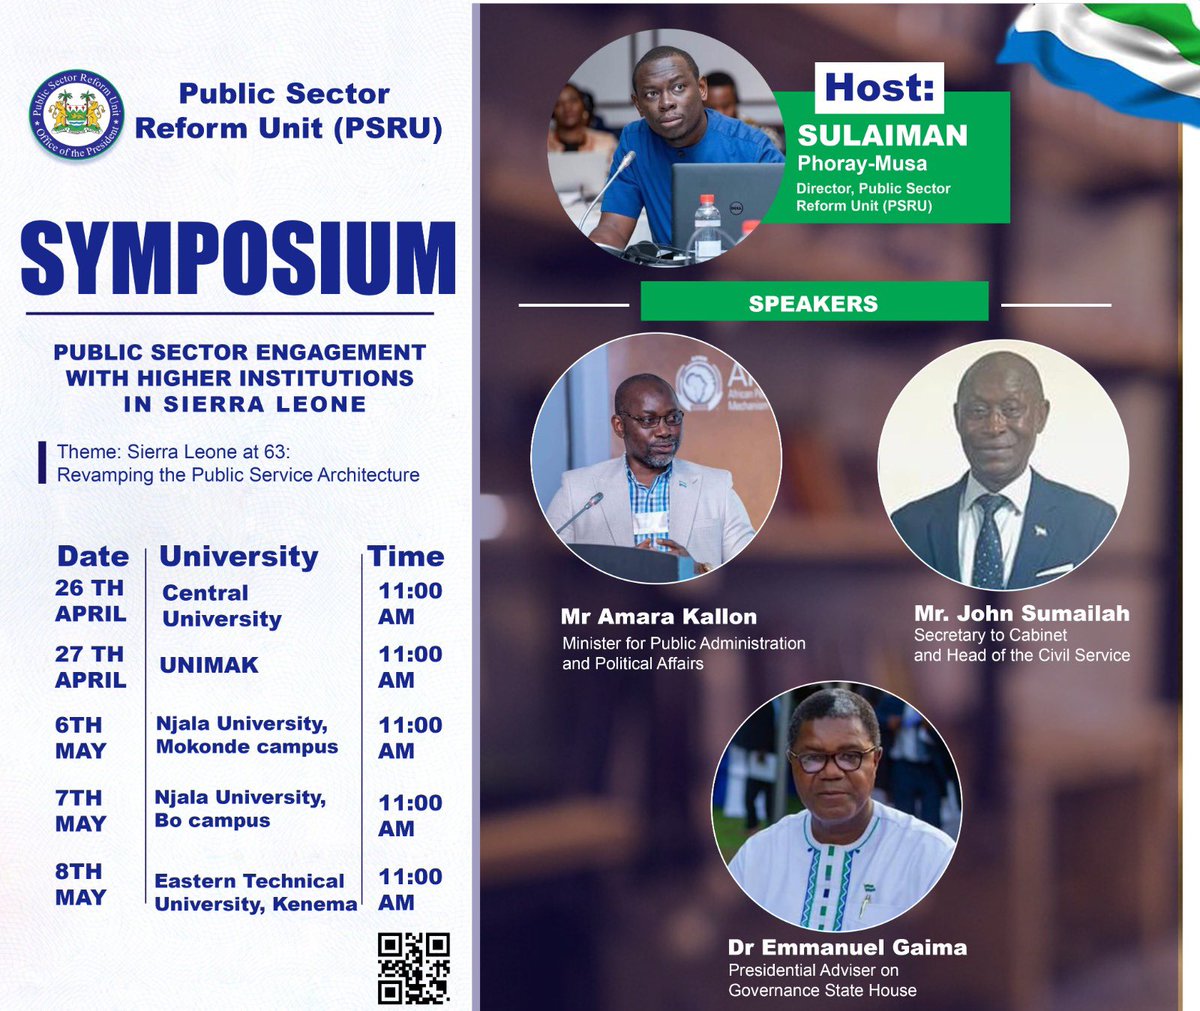 The Public Sector Reform Unit is organizing symposiums for Universities across the country to promote dialogue, enhanced knowledge and awareness on Public Sector Reform initiatives, focusing on Pillar 5 of the Big 5 Game Changer: Revamping the Public Service Architecture.